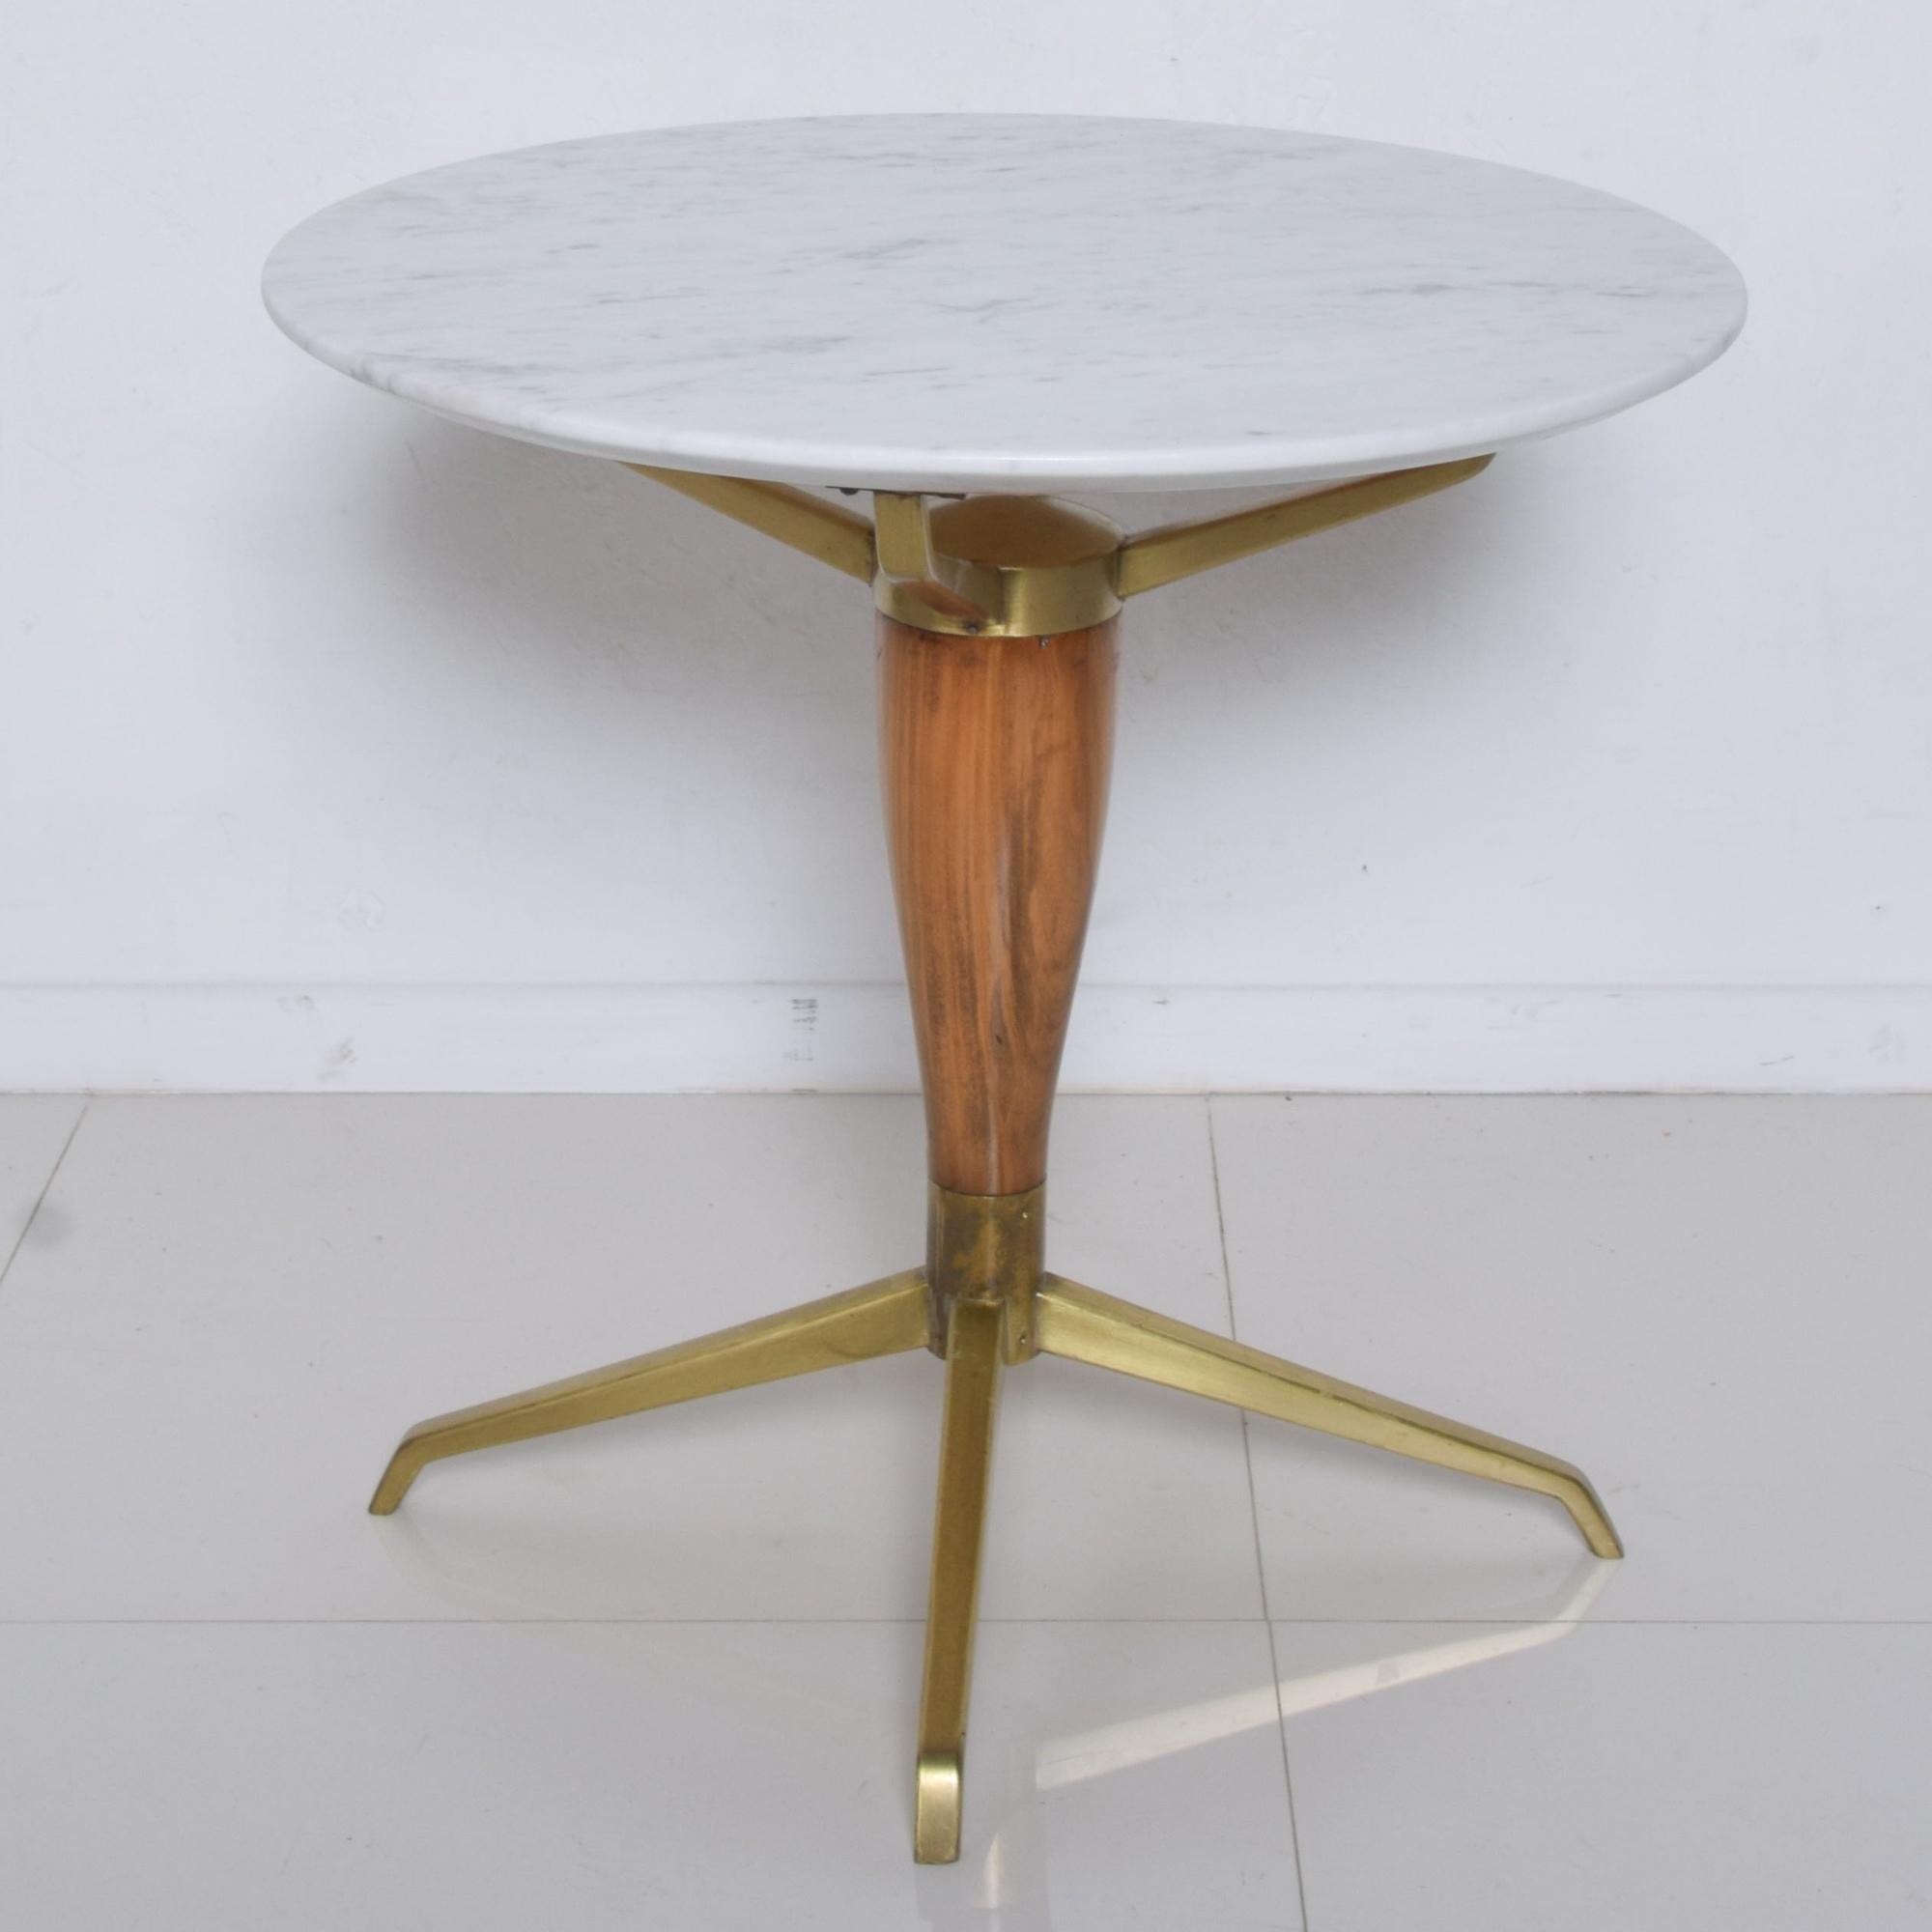 Regency Art Deco Divine French gueridon side table made in Mexico, circa late 1950s.
Attributed to famed Mexican Modernist, Arturo Pani, unmarked piece.
Measures: 22